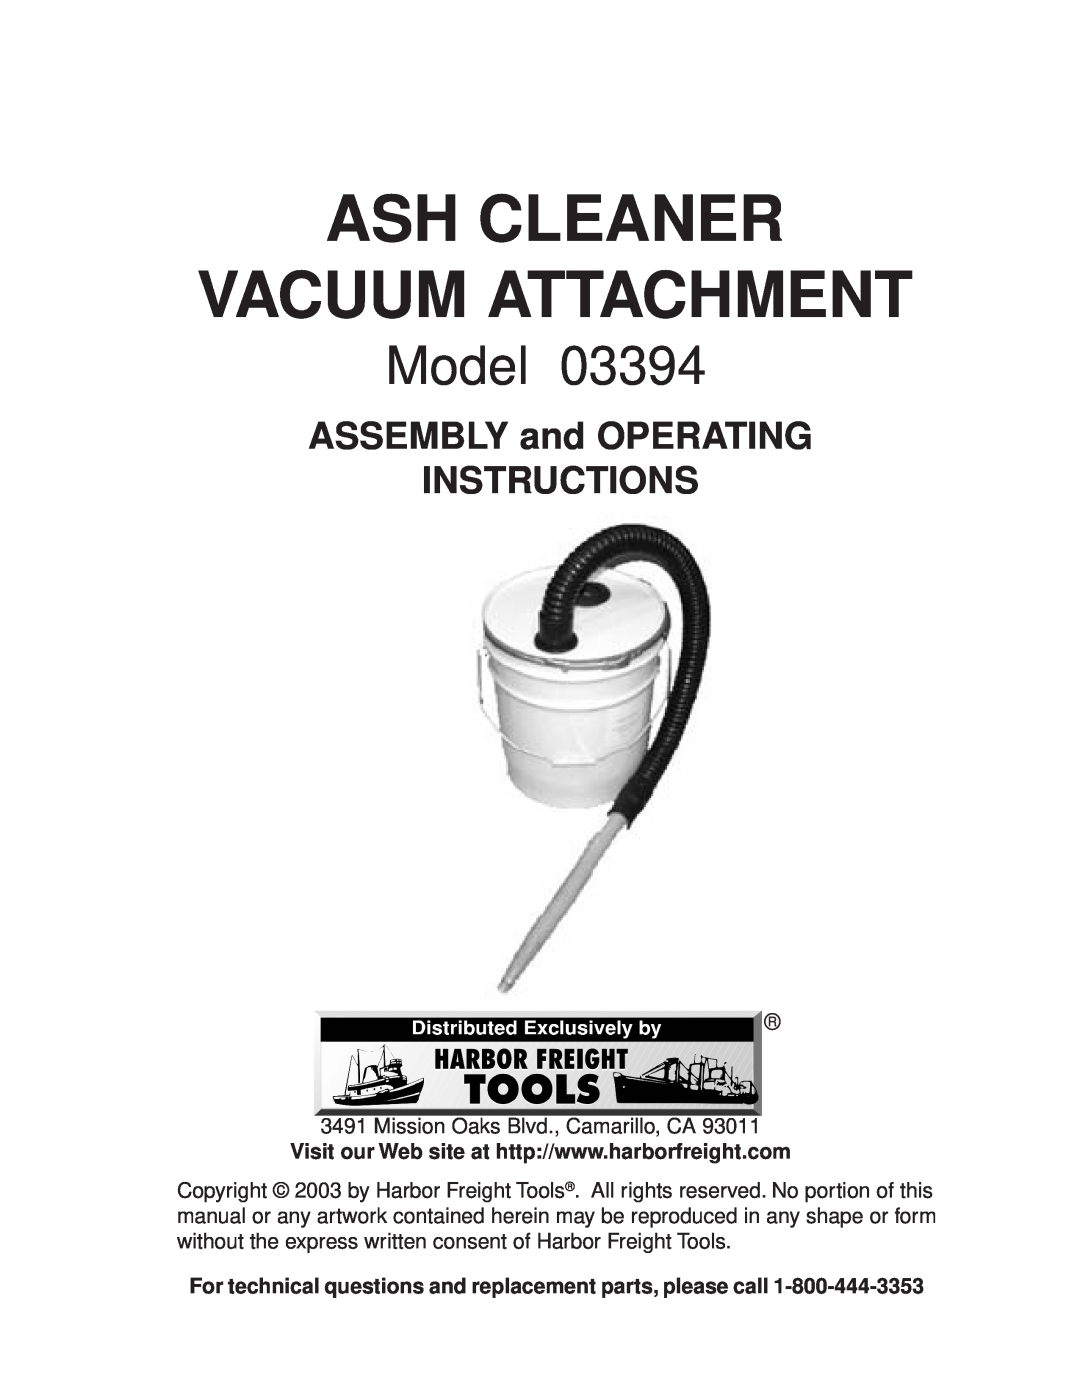 Harbor Freight Tools 3394 operating instructions Ash Cleaner Vacuum Attachment, Model, ASSEMBLY and OPERATING INSTRUCTIONS 